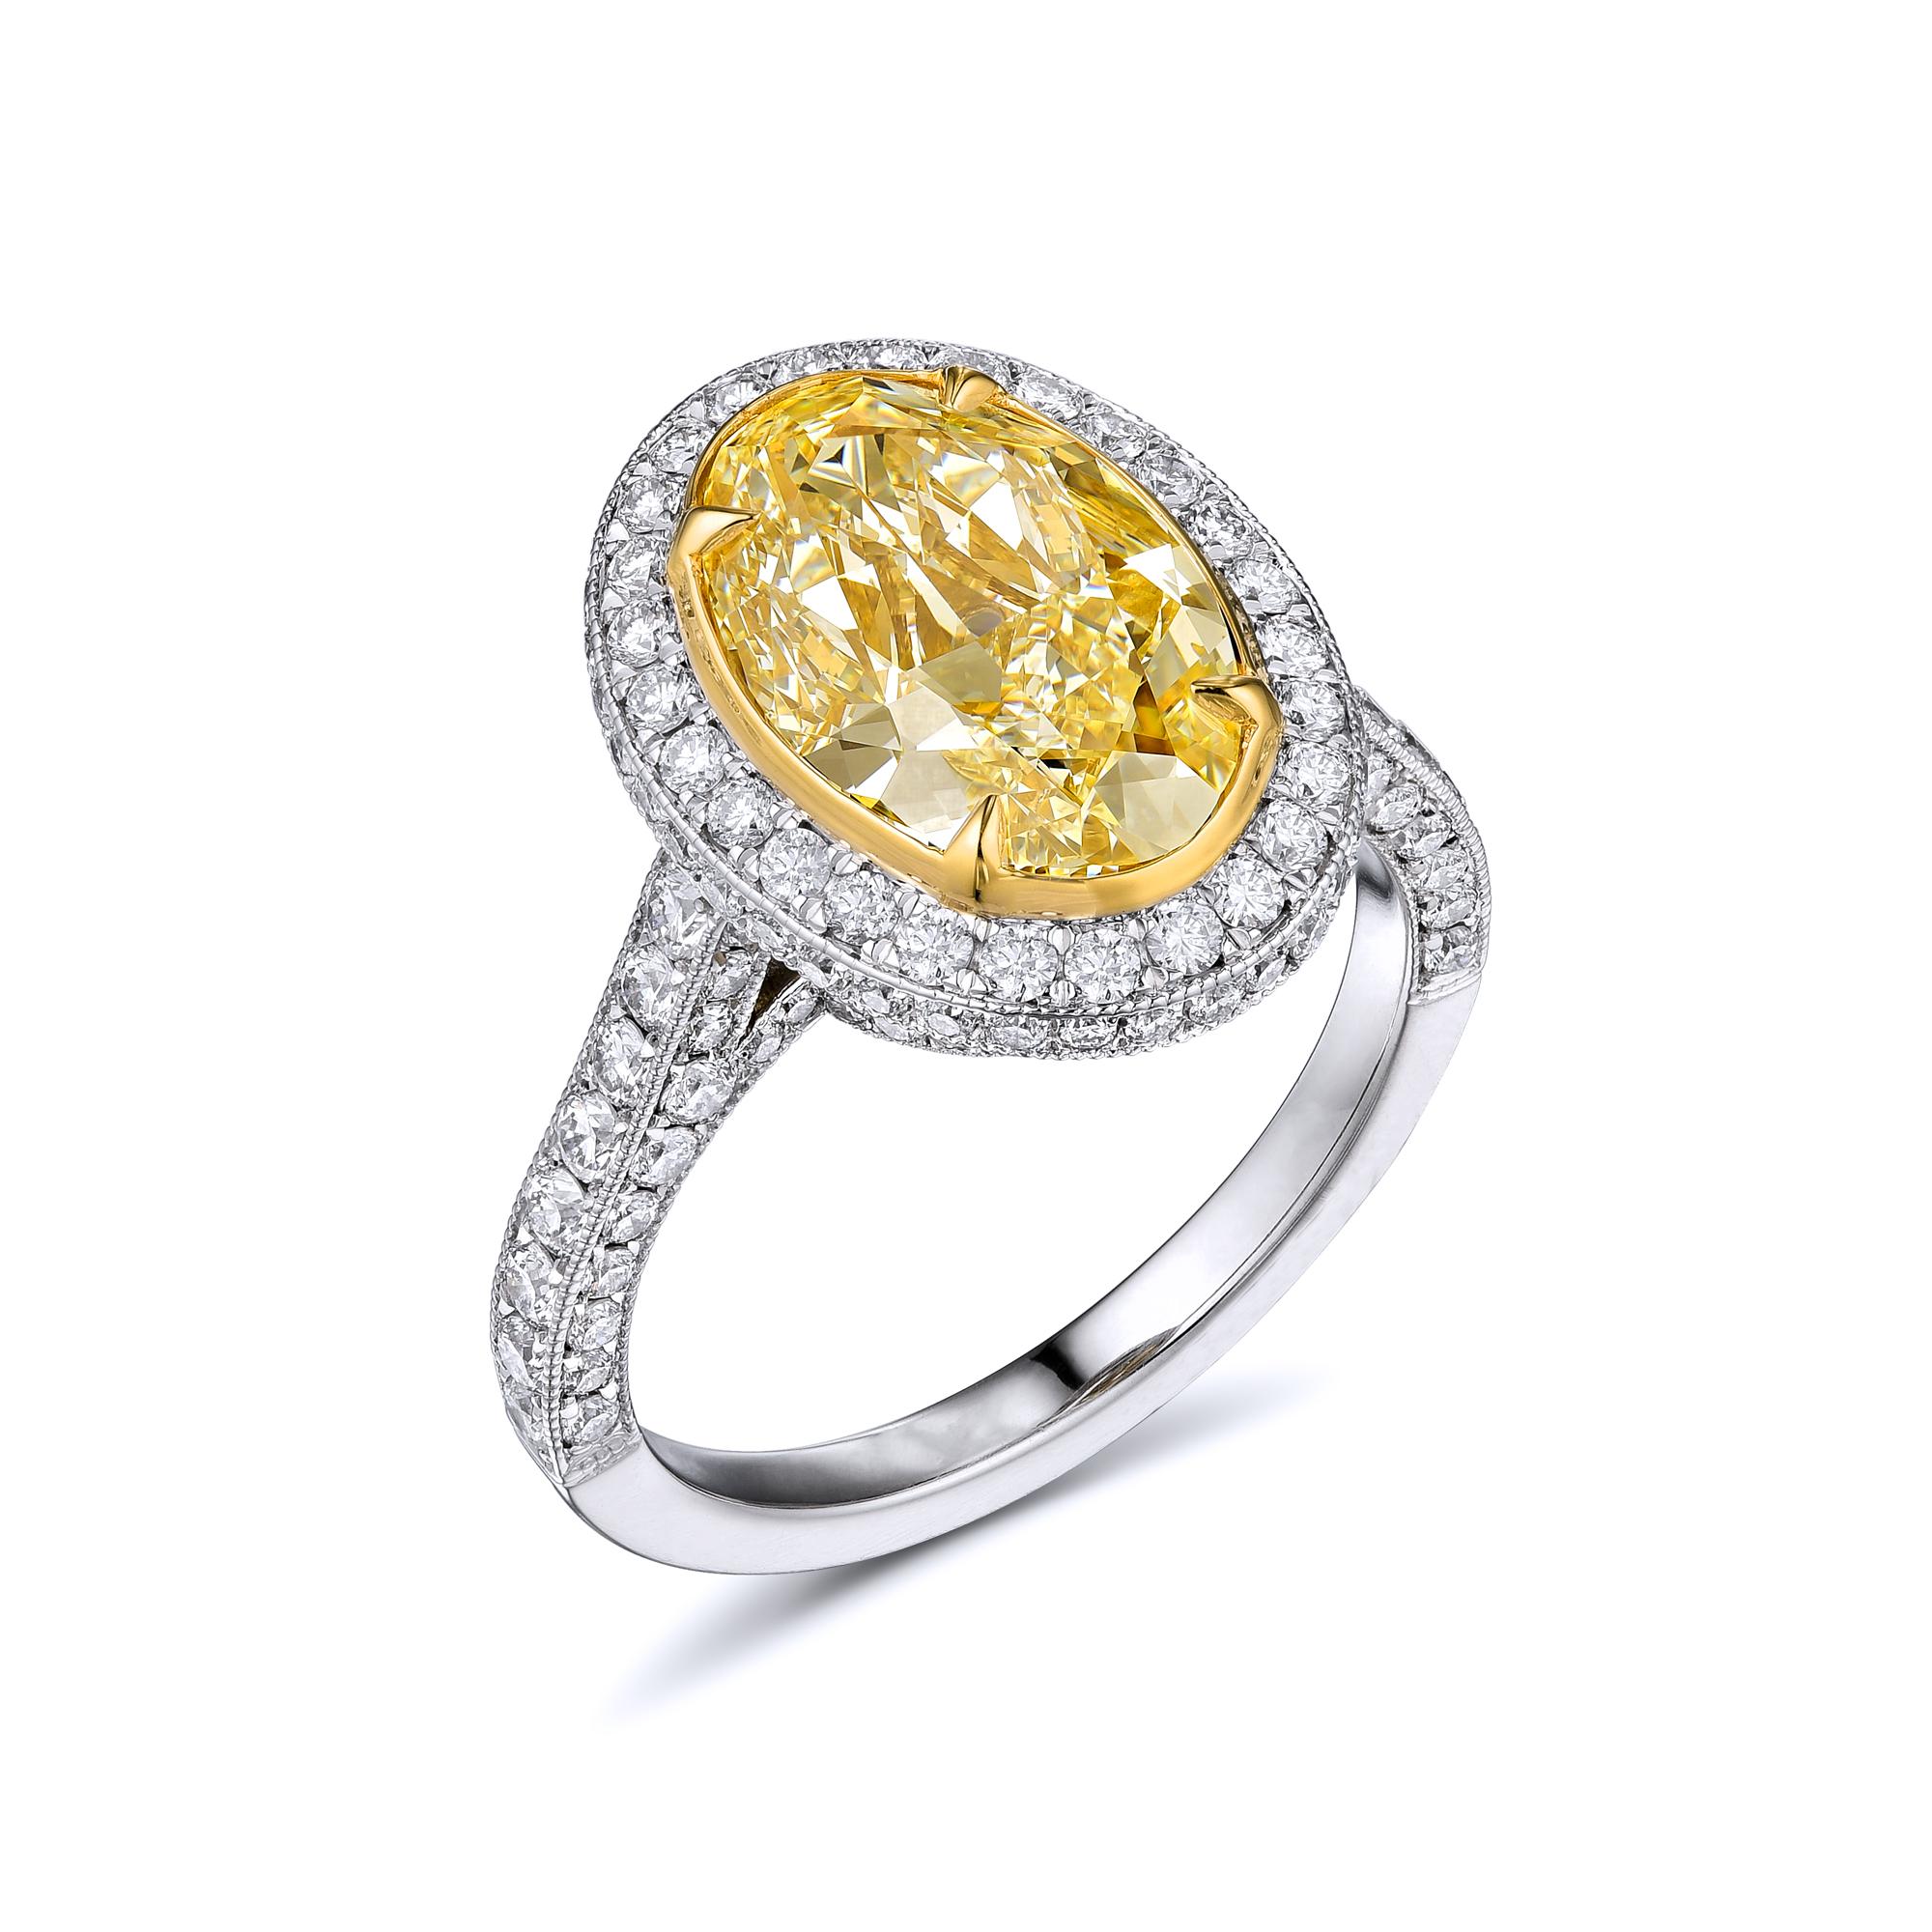 Diamond ring with EGL Certificate, no. US311986601D. Center stone: 3.17ct/ VS2 Oval cut fancy yellow diamond, 12.1 x 8.09 x 5.00 mm. 
Side stones: 1.18ct/ E-F-G VS2-SI2 Brilliant round diamonds. Total carat weight: 4.35ct. Metal: Platinum and 18K